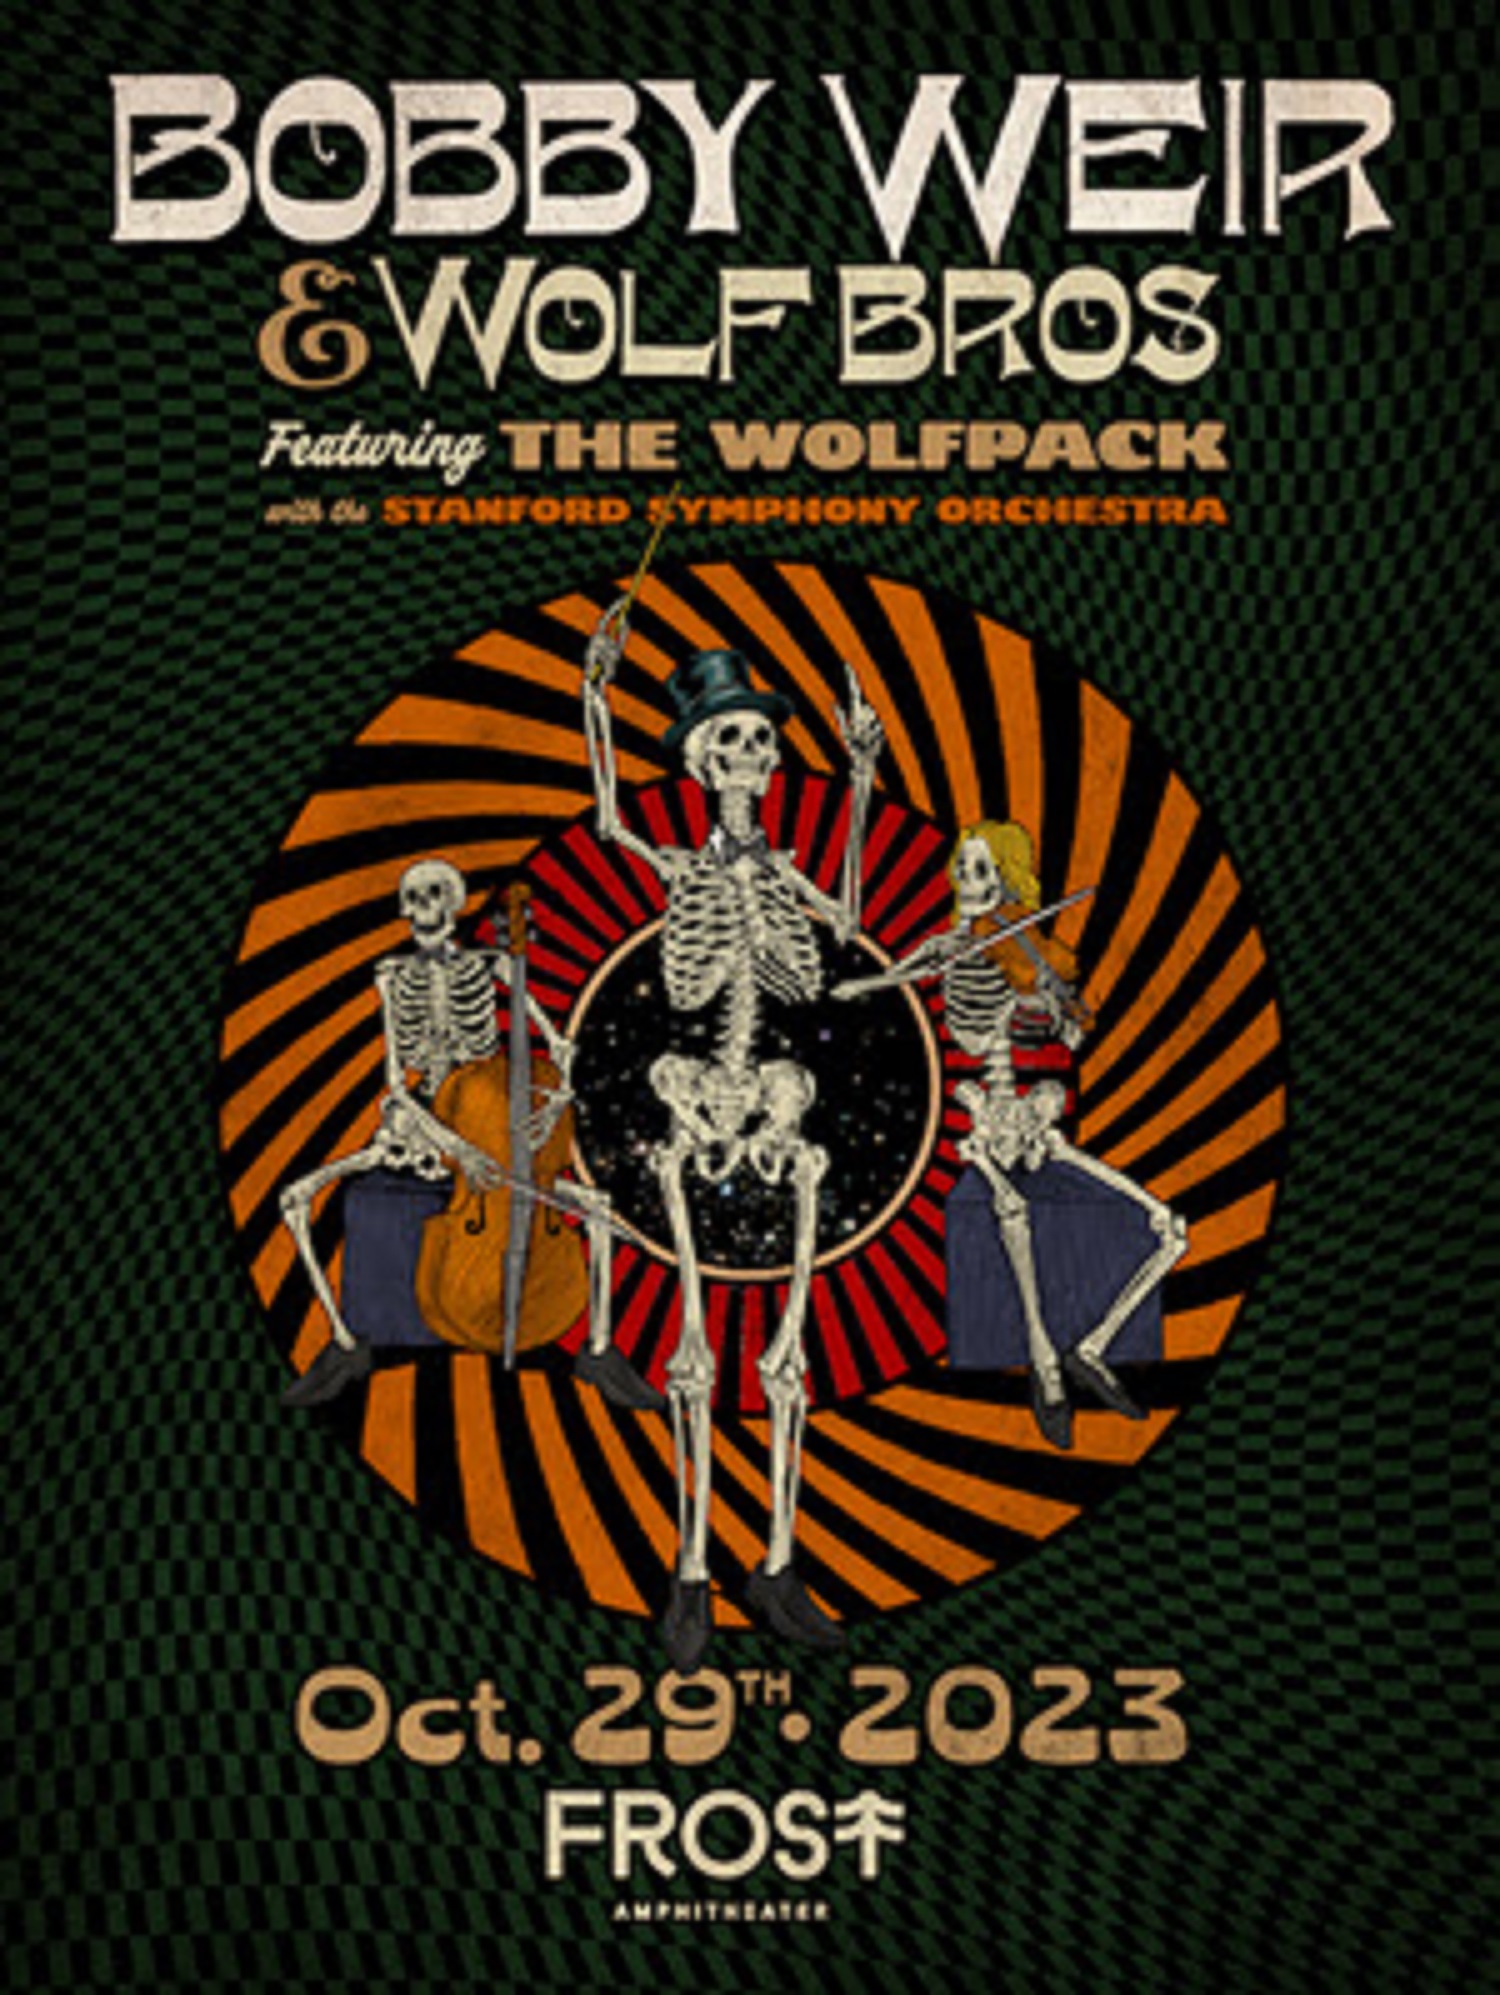 Bobby Weir & Wolf Bros featuring The Wolfpack to perform with the Stanford Symphony Orchestra 10/29